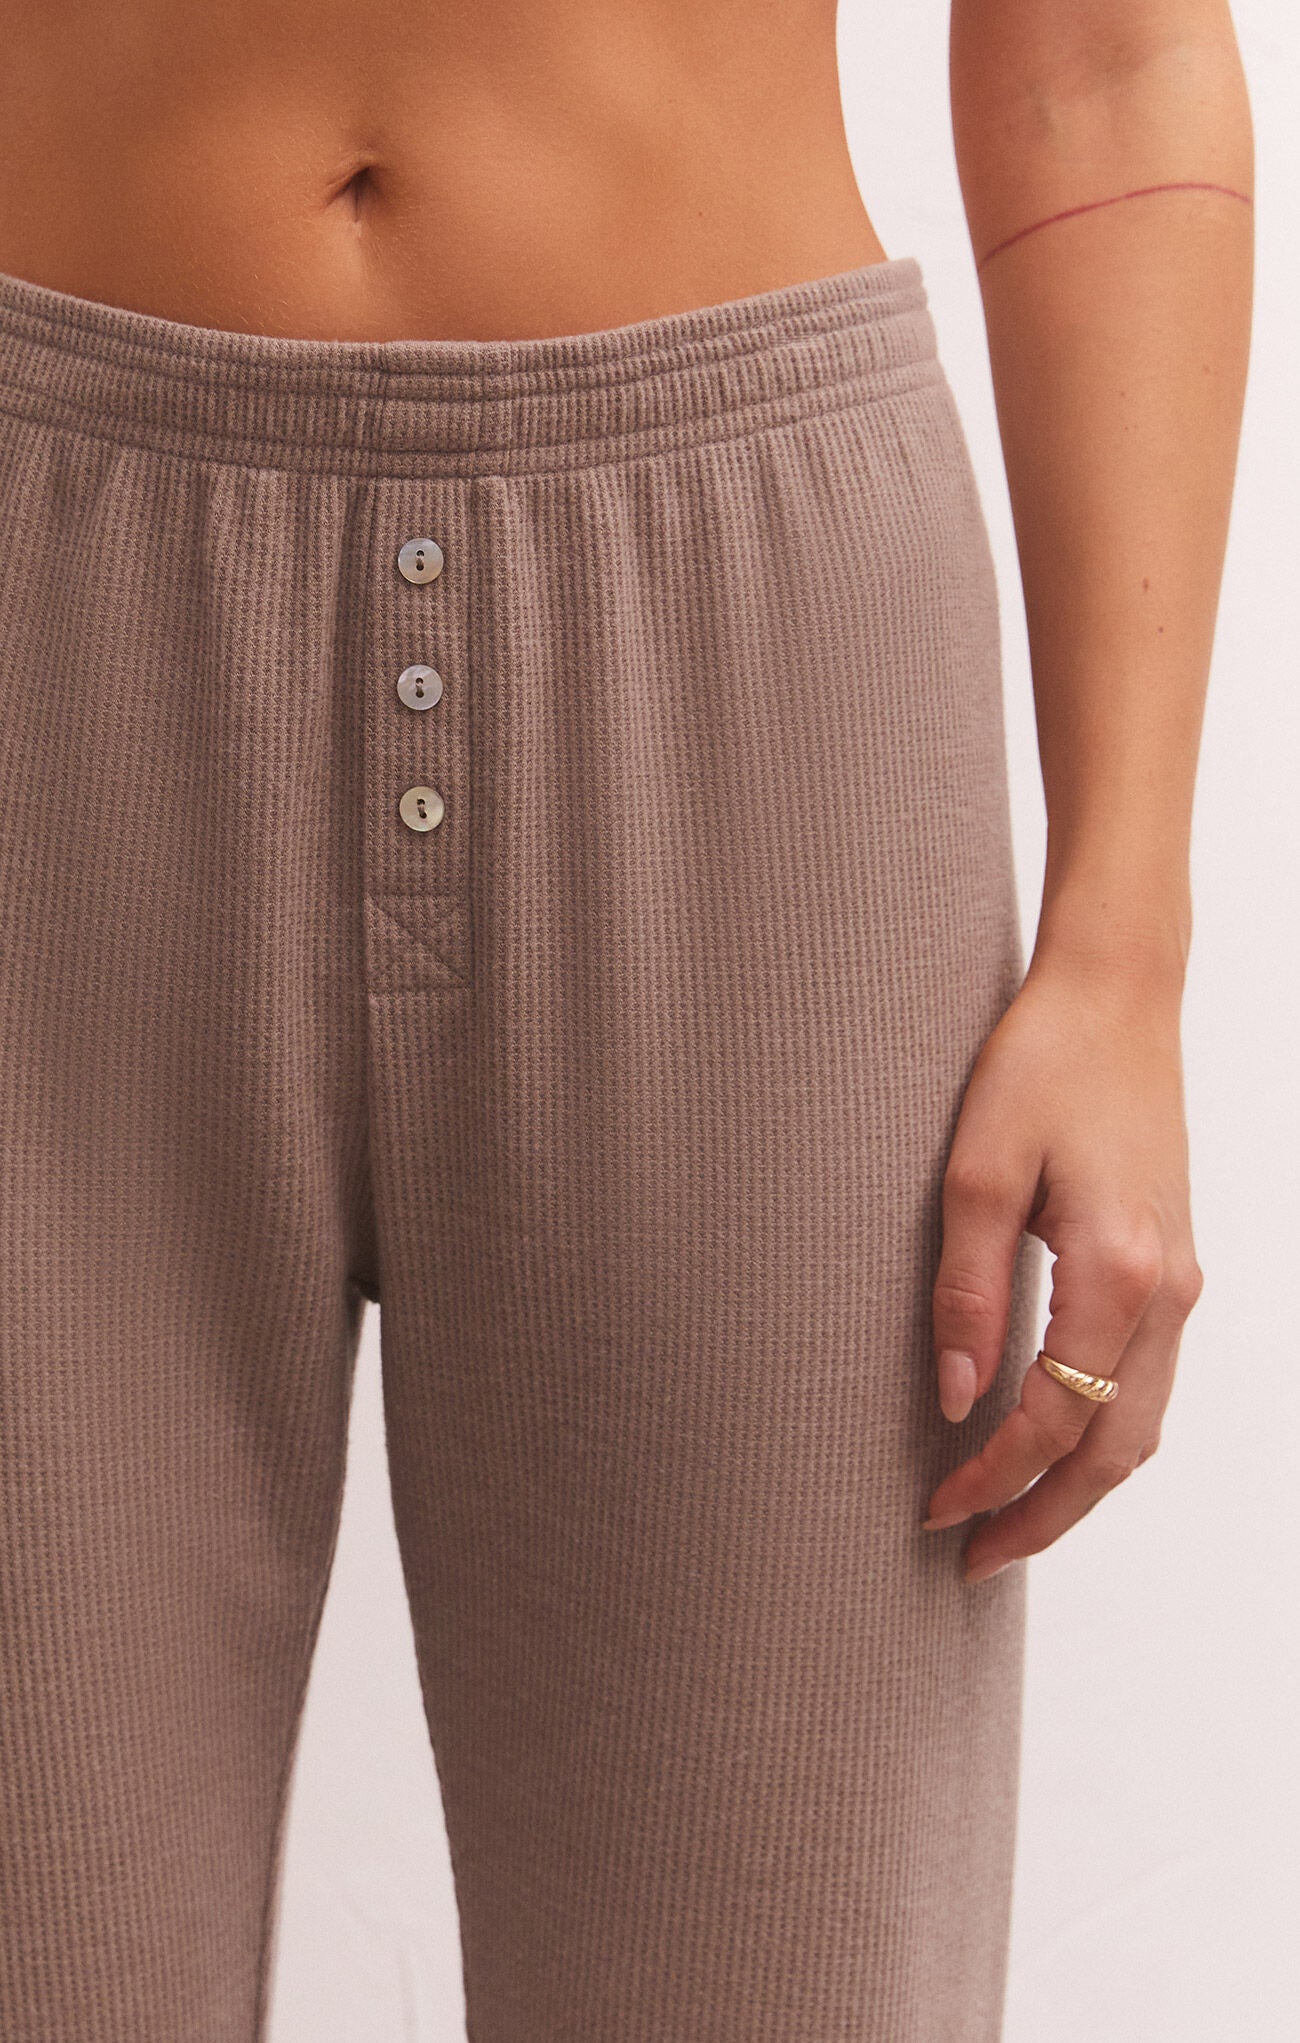 Taupe Stone Cozy Days Thermal Jogger